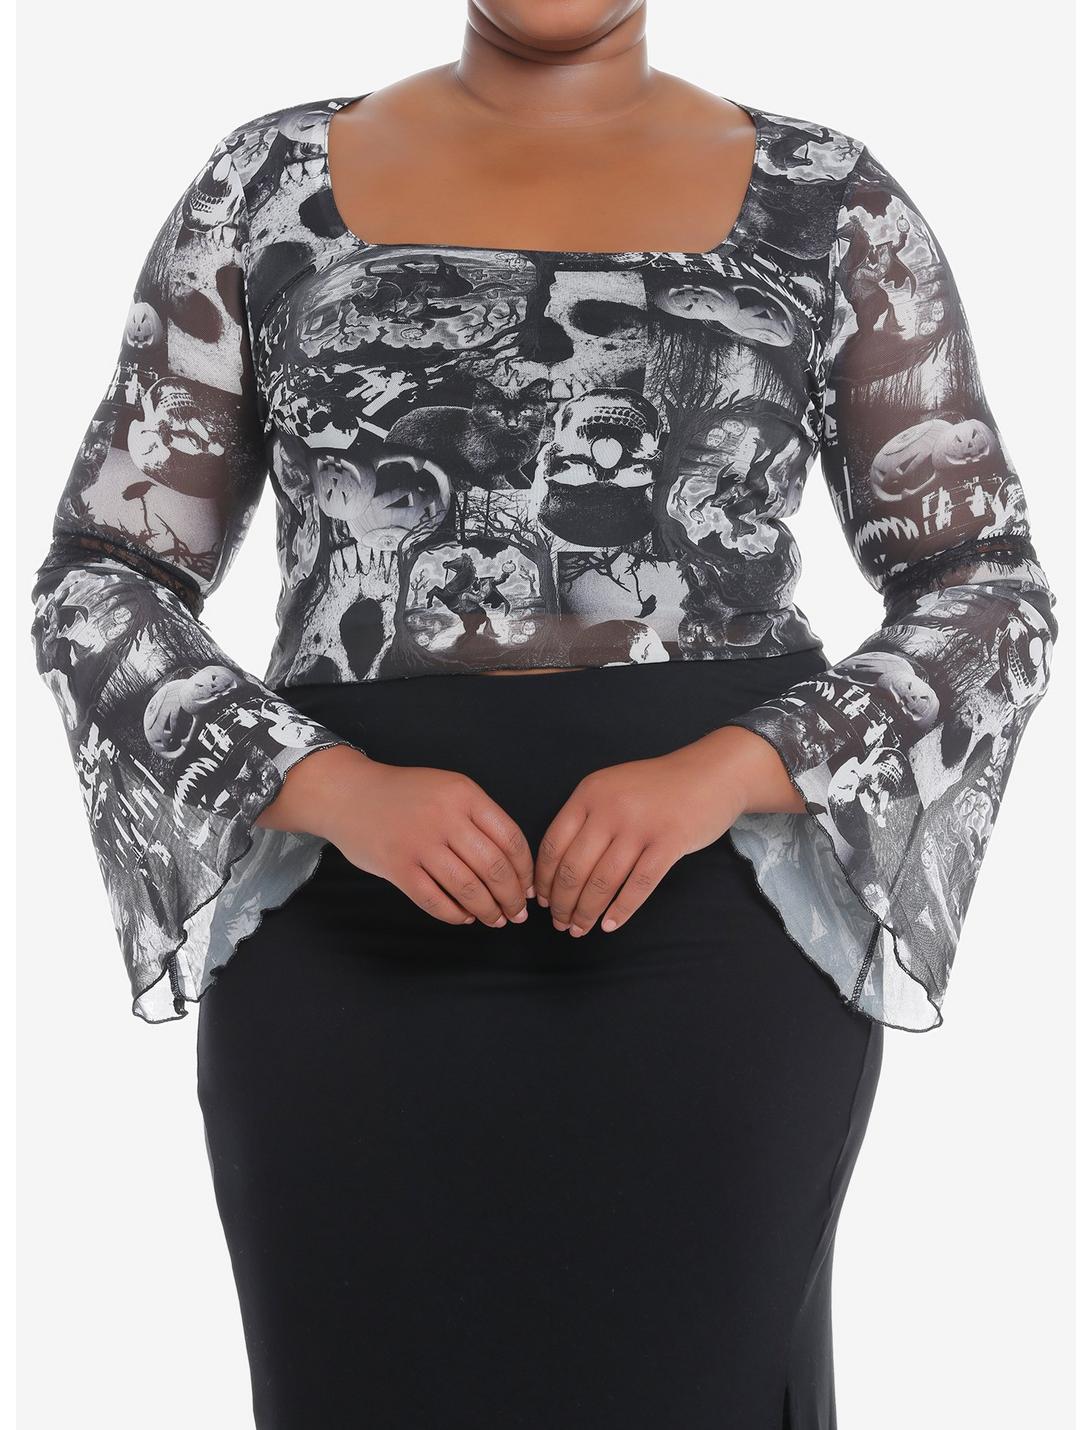 Social Collision Sleepy Hollow Collage Bell Sleeve Girls Crop Top Plus Size, WHITE GRAY, hi-res